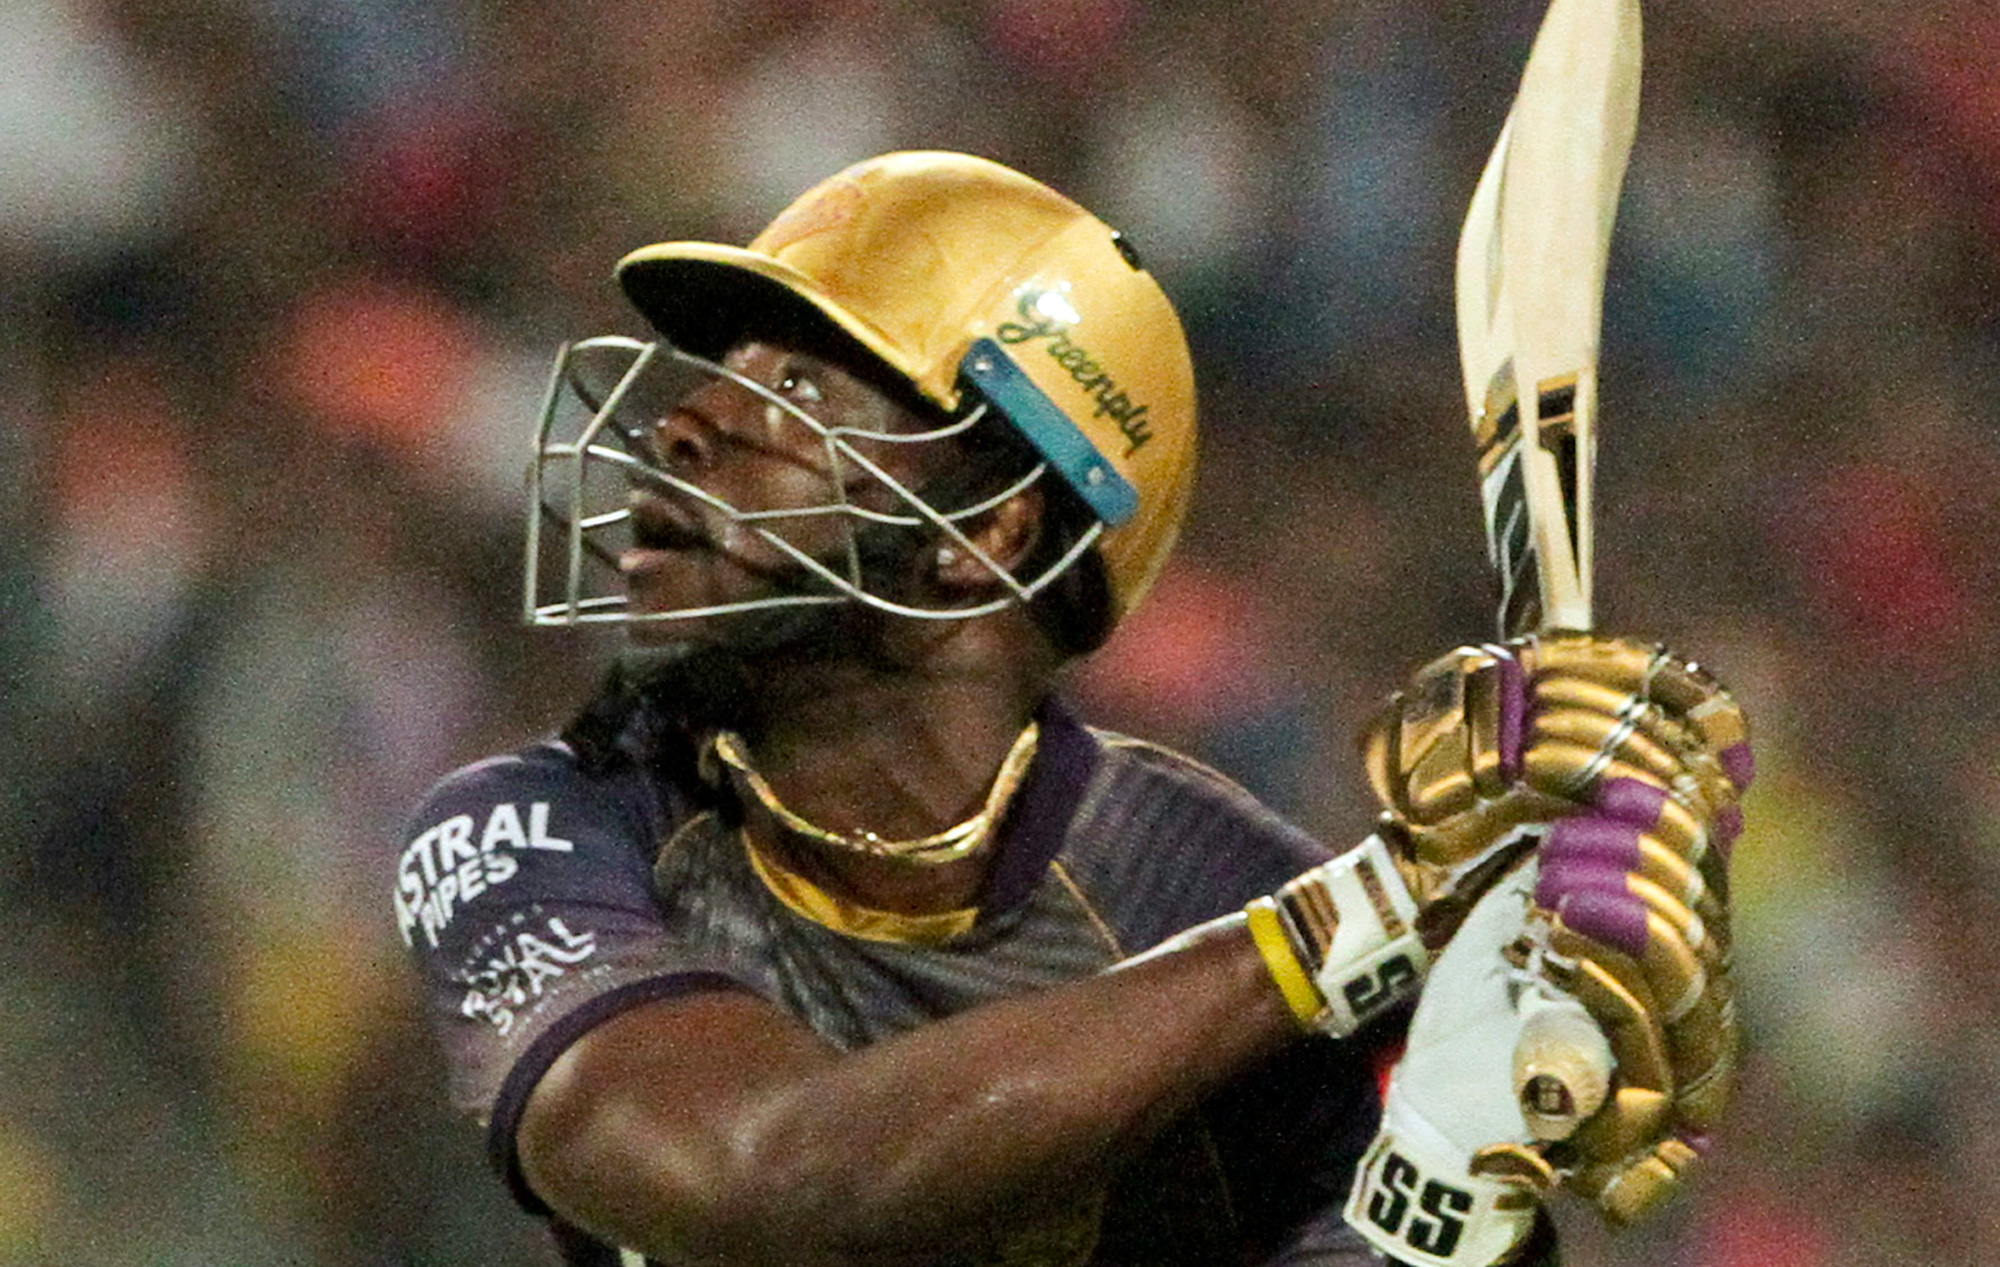 The magic of Andre Russell’s batting style lies in its simplicity